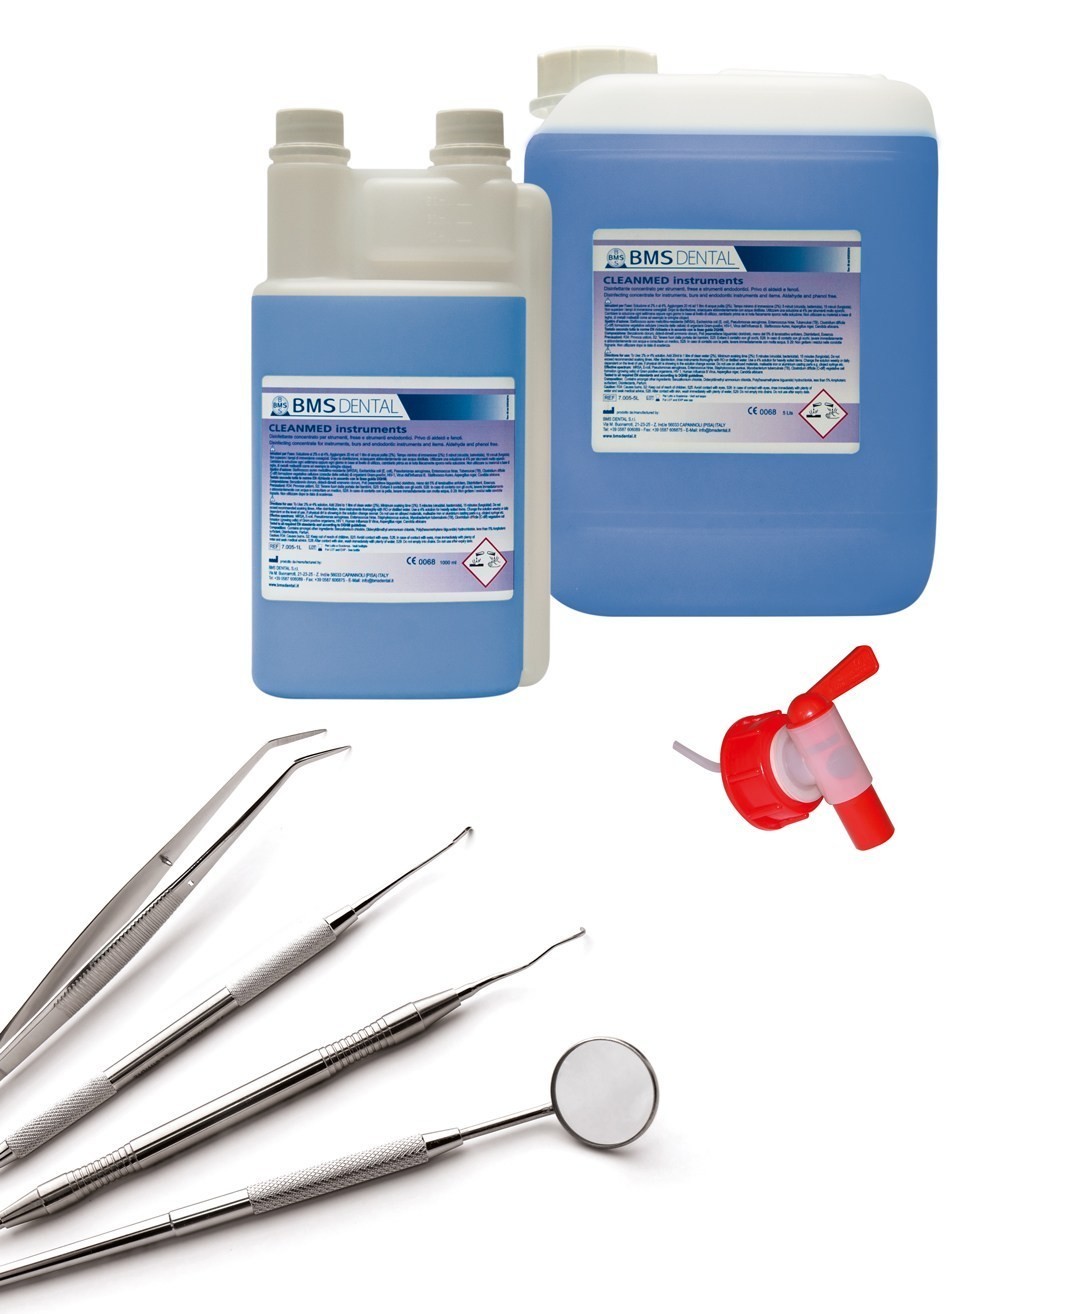 Cleanmed Instruments 5L